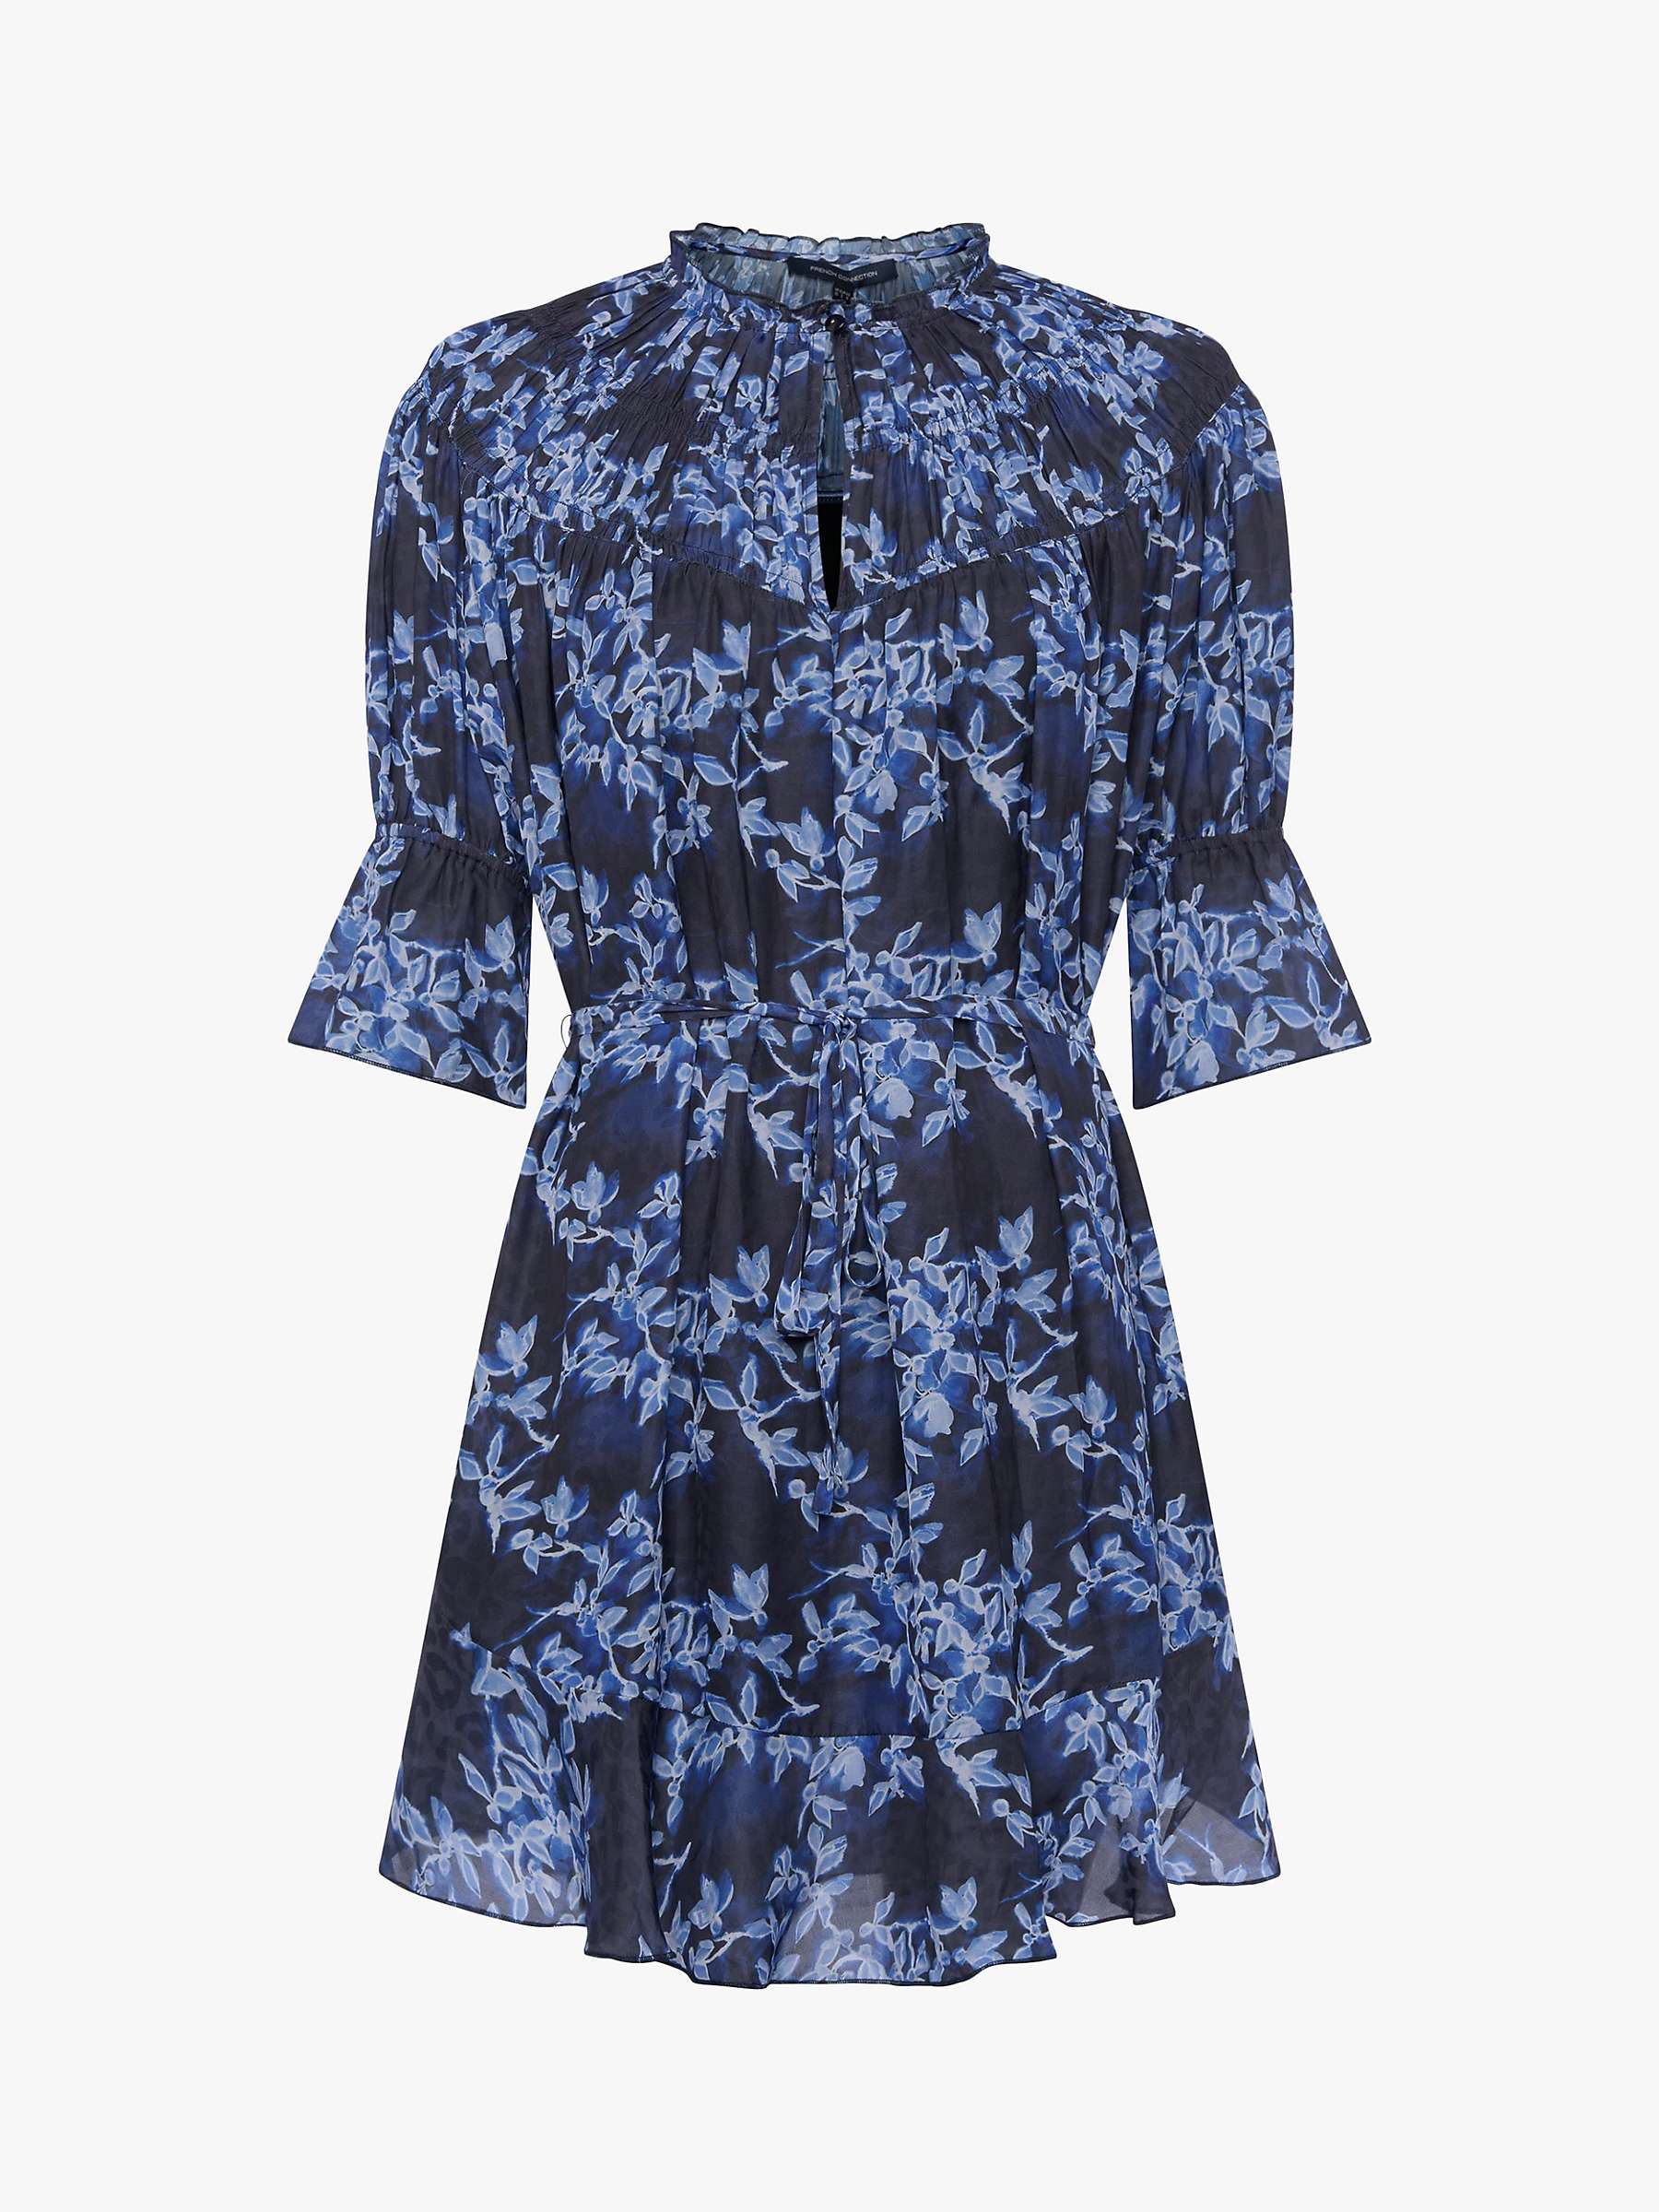 Buy French Connection Dionne Floral Print Gathered Mini Dress, Sea Blue/Winter White Online at johnlewis.com